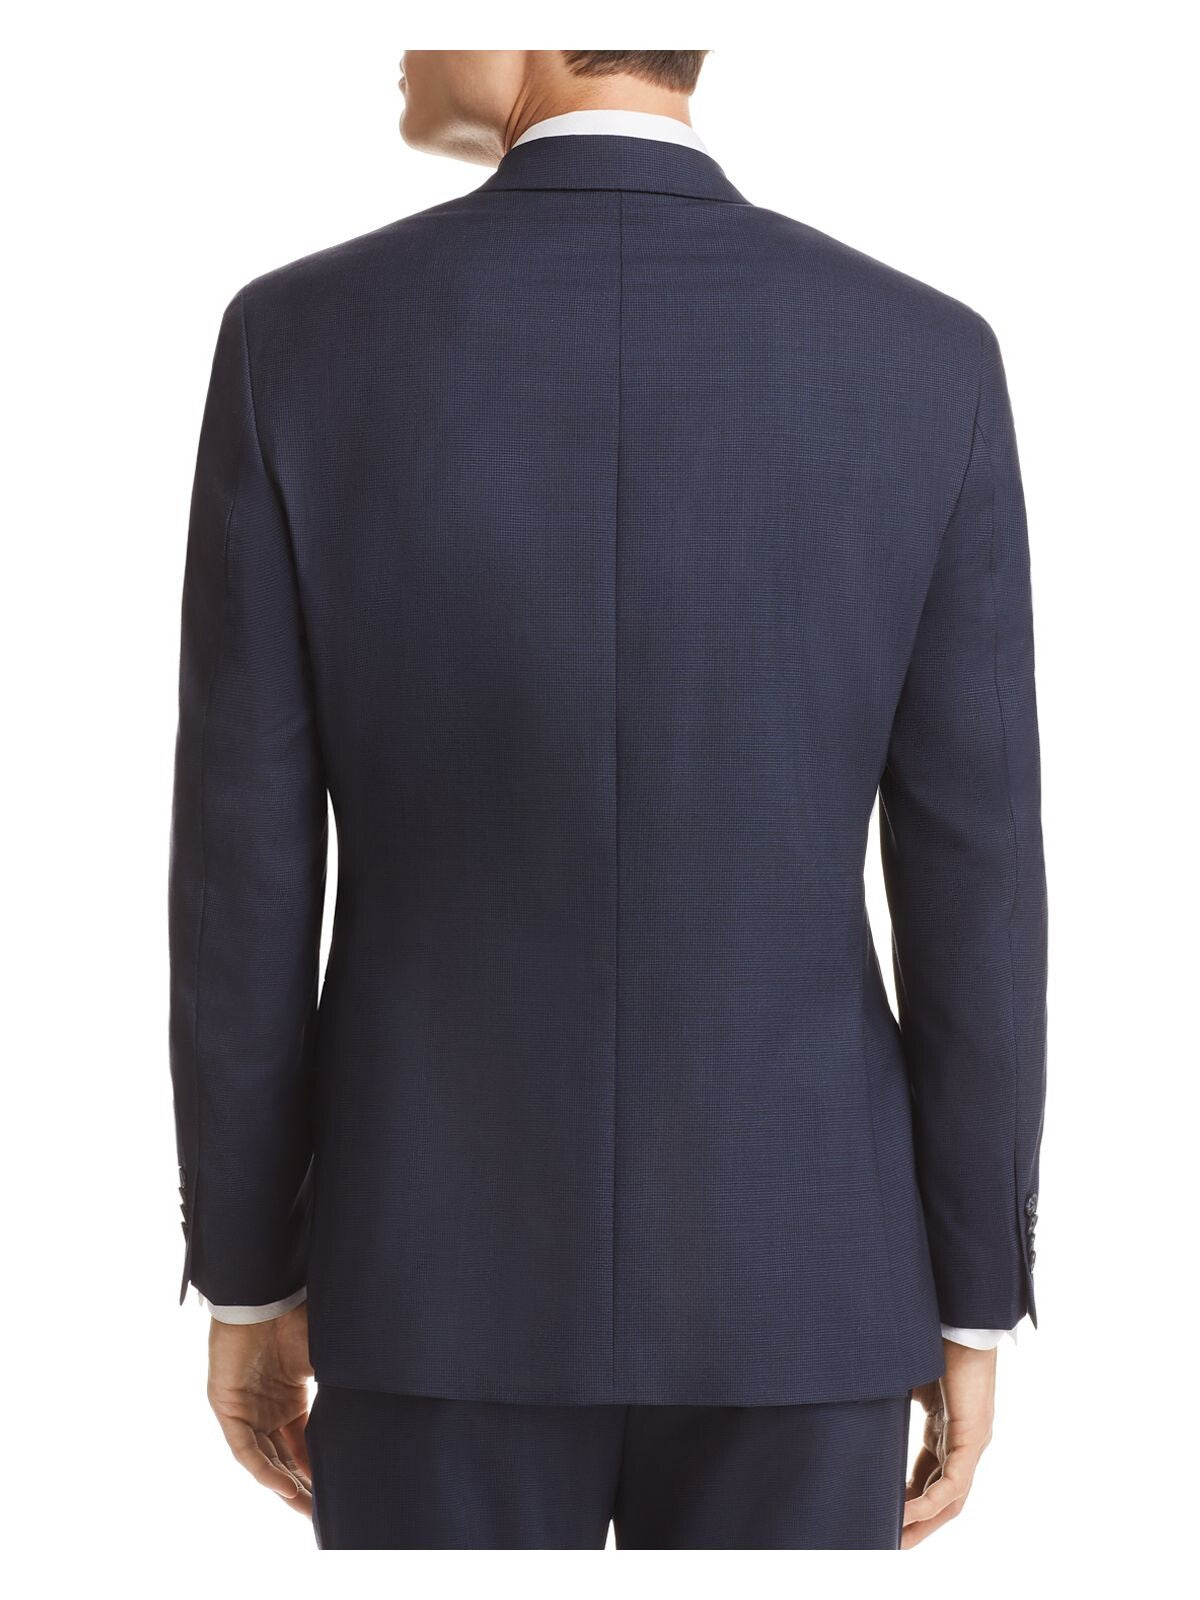 MICHAEL KORS Mens Navy Single Breasted, Stretch, Classic Fit Wool Blend Suit Separate Blazer Jacket 40L